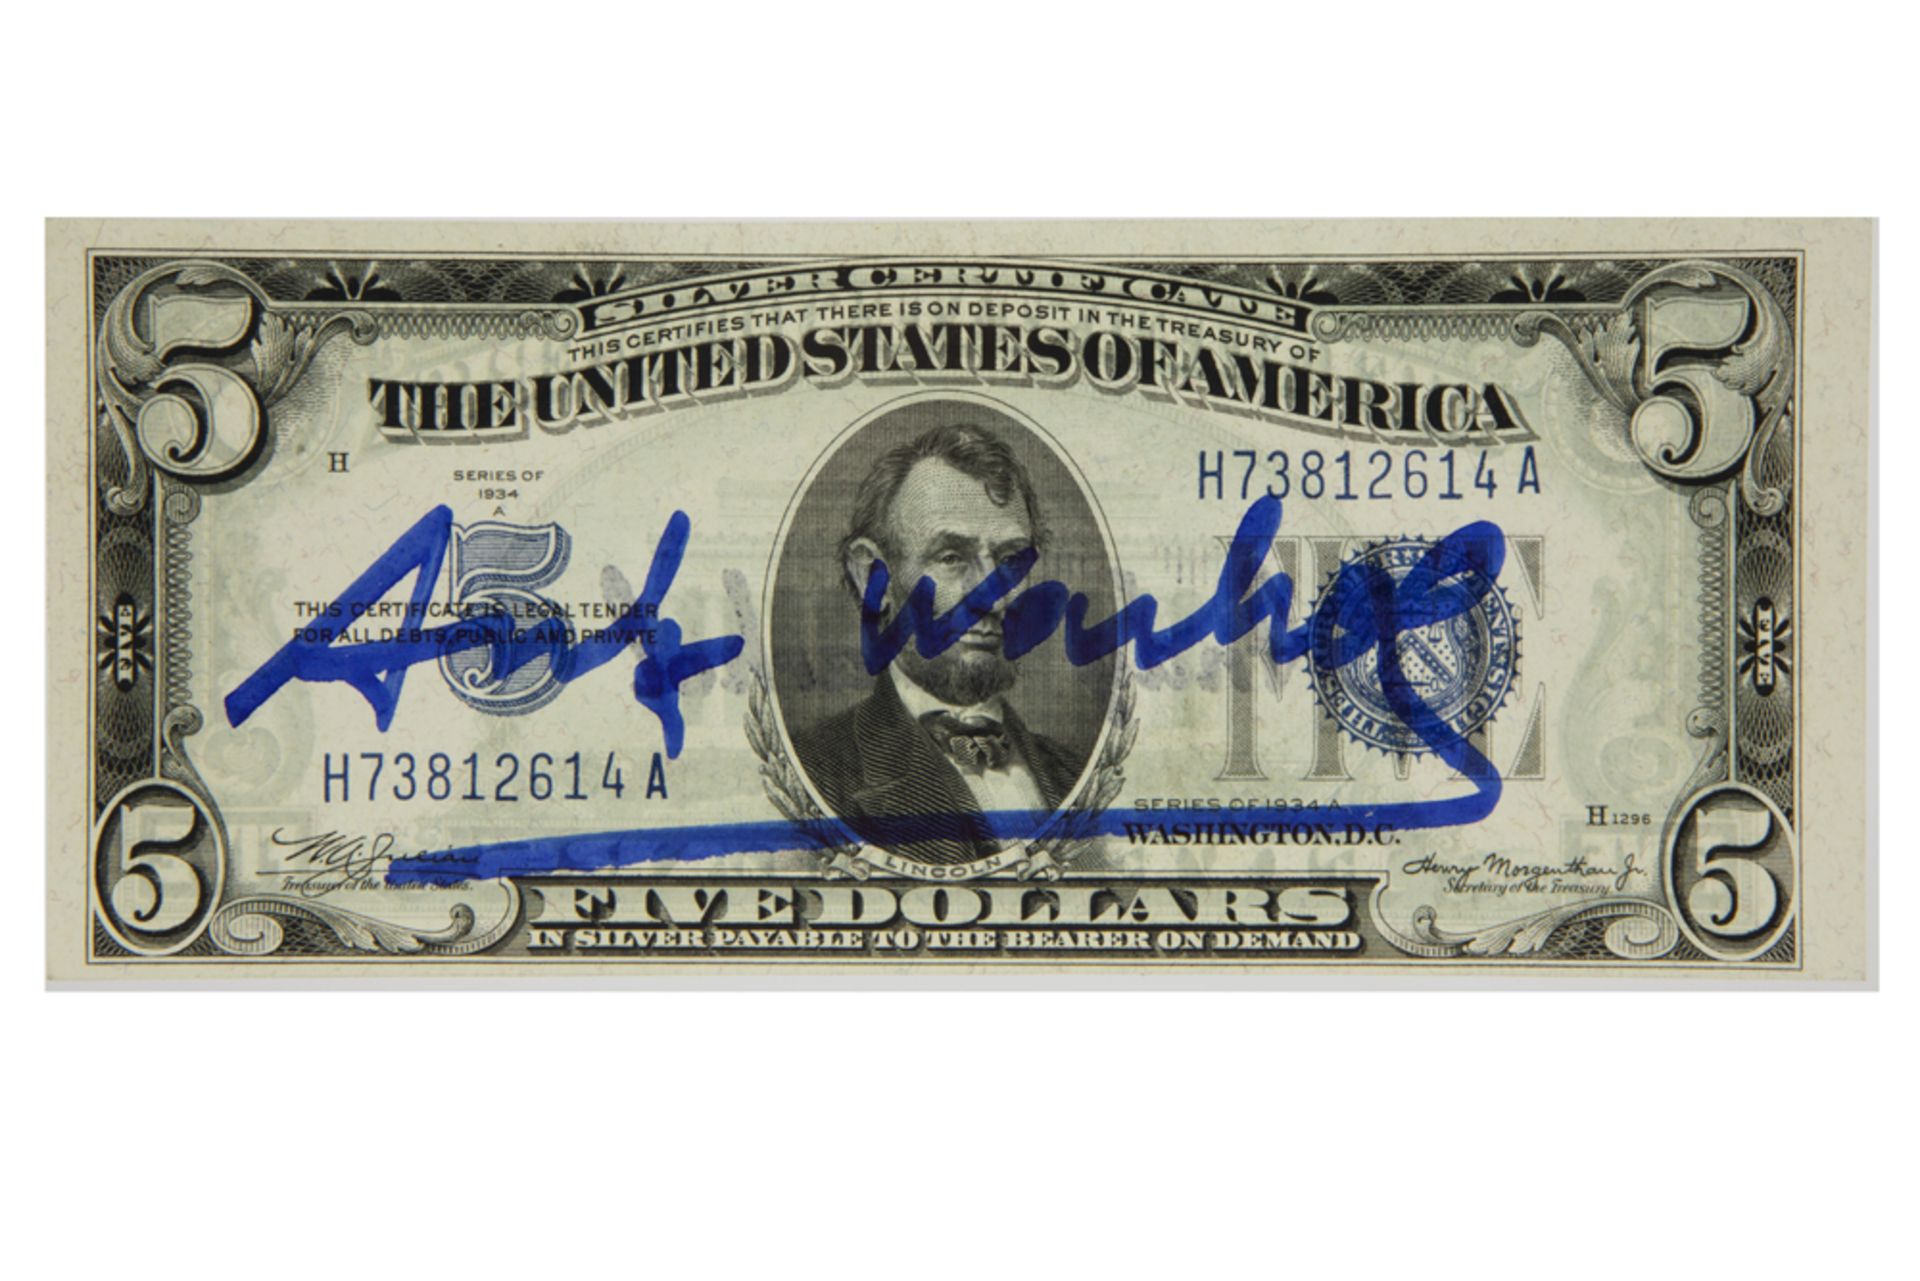 Andy Warhol handsigned Two Dollar banknote (series of 1834 with A. Lincoln) with a signature stamp